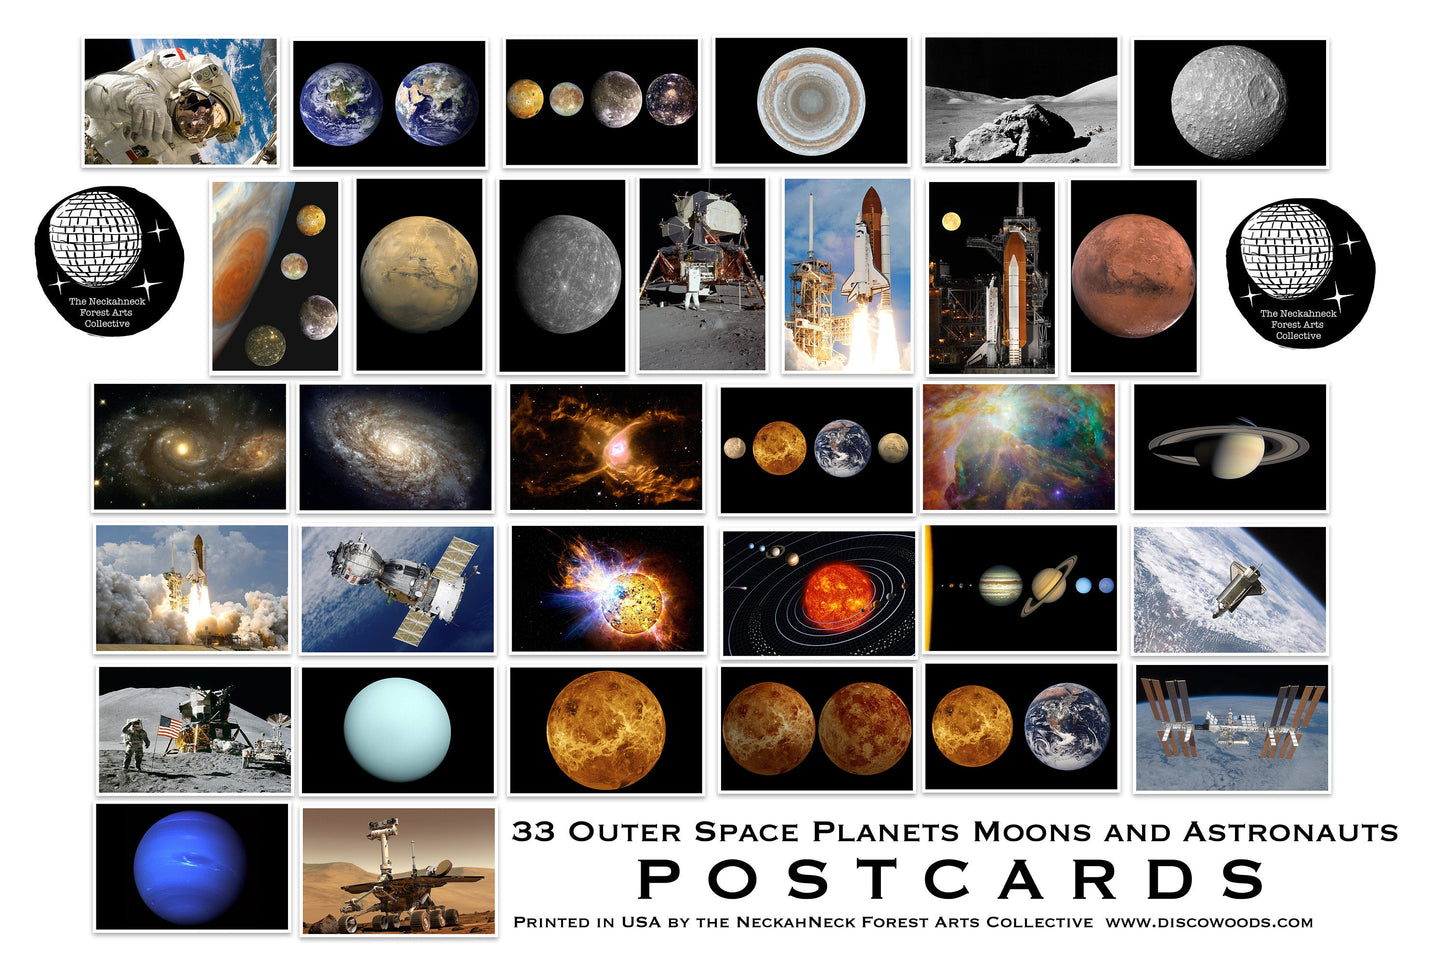 Space and Planet Postcard Pack - Set of 33 Postcards - NASA - Planets - Astronomy - Galaxies - Fantasy - Solar System